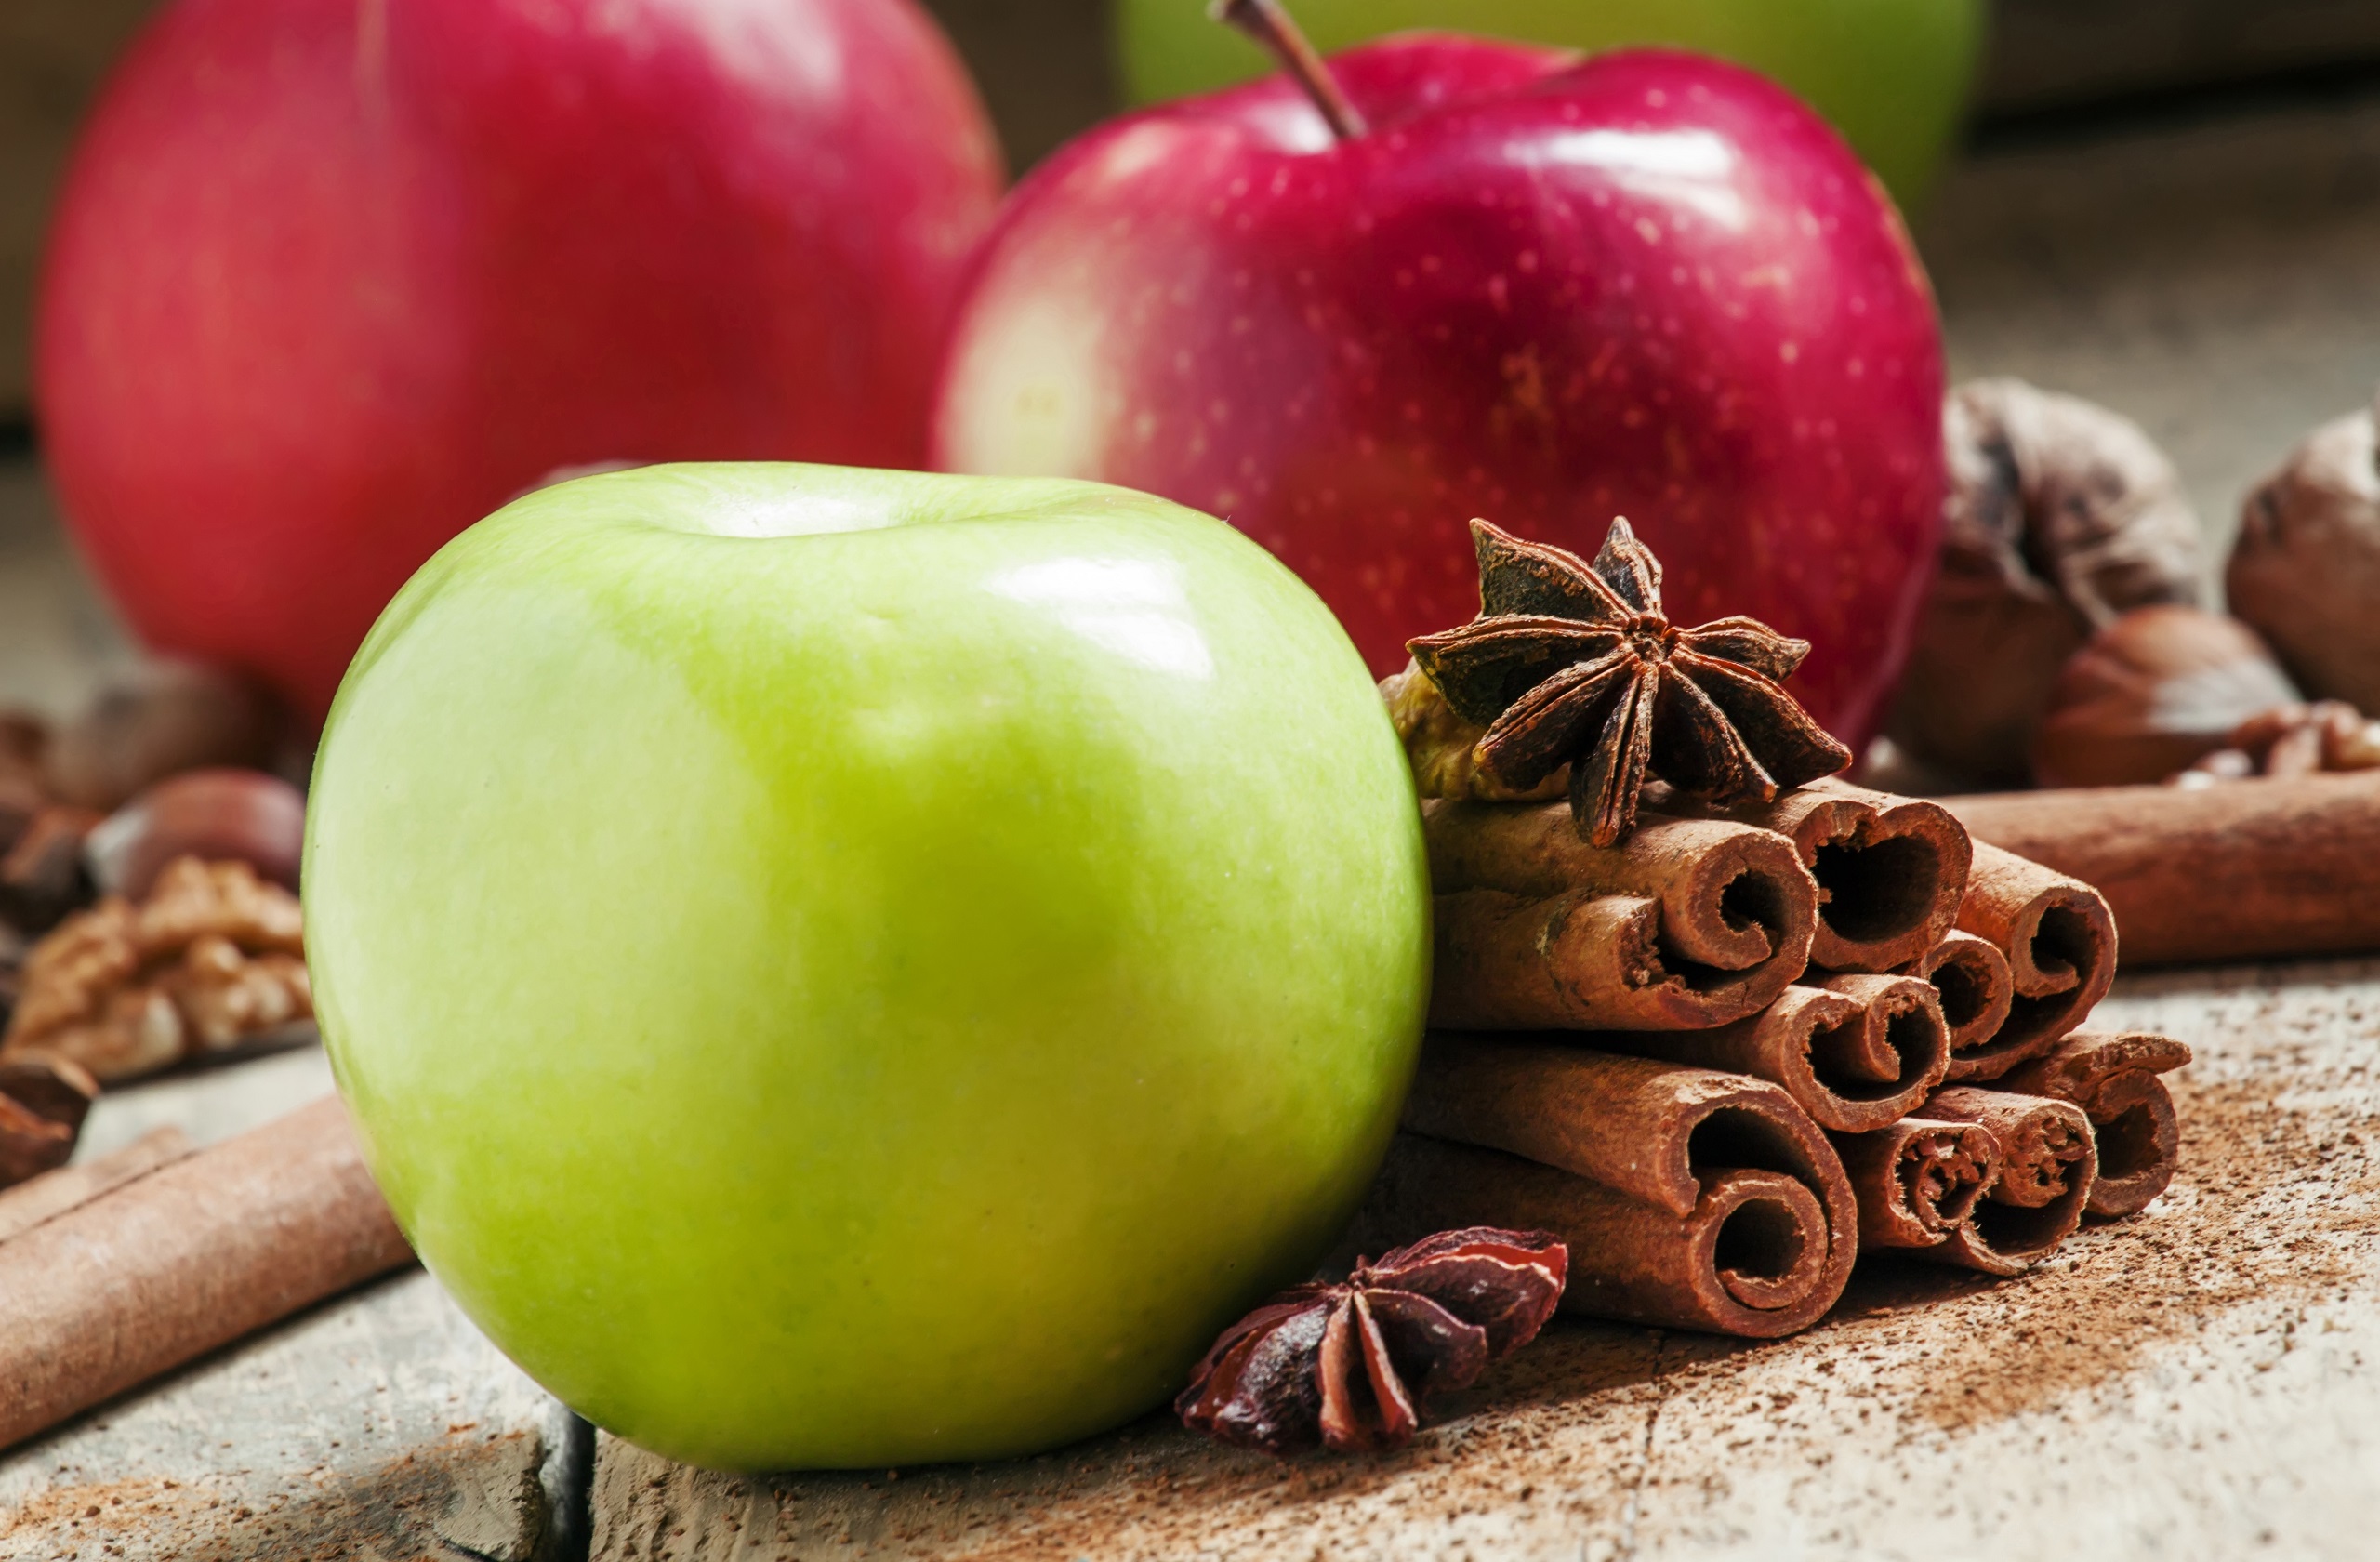 Juicy red and green apples with cinnamon sticks, grounded cinnamon, anise stars, walnuts and hazelunts, on a rustic wooden background.